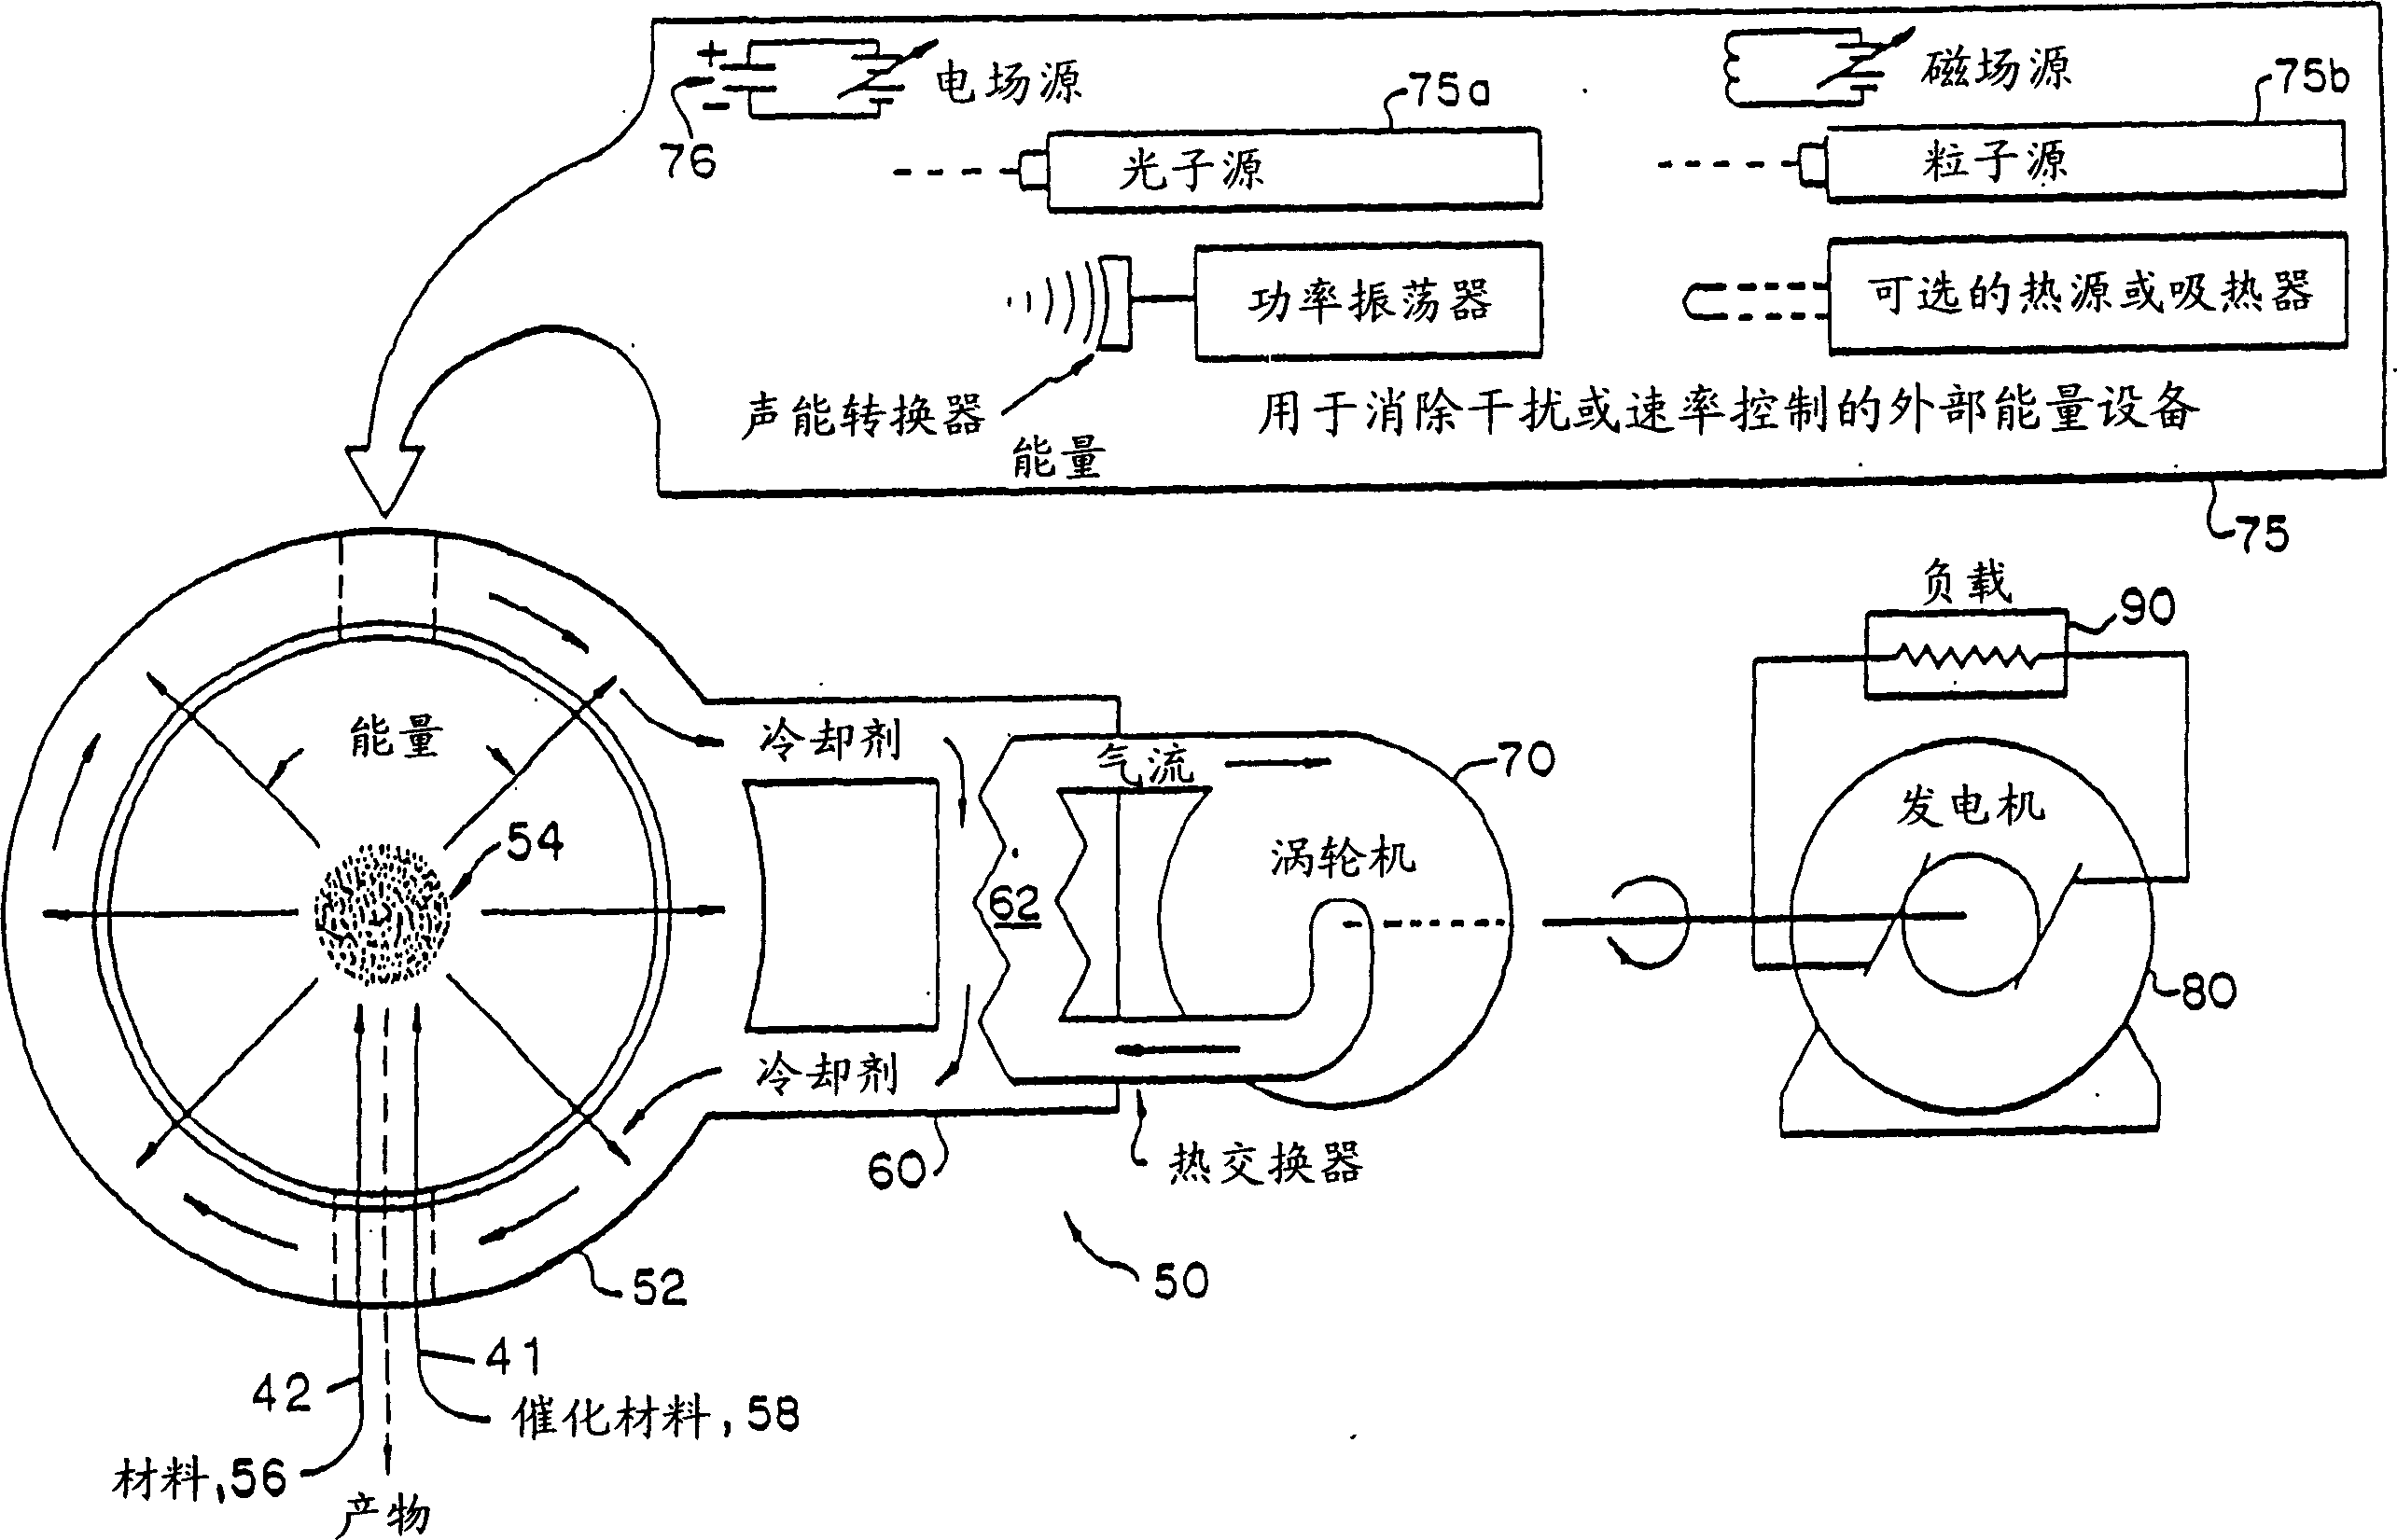 Microwave power cell, chemical reactor and power converter